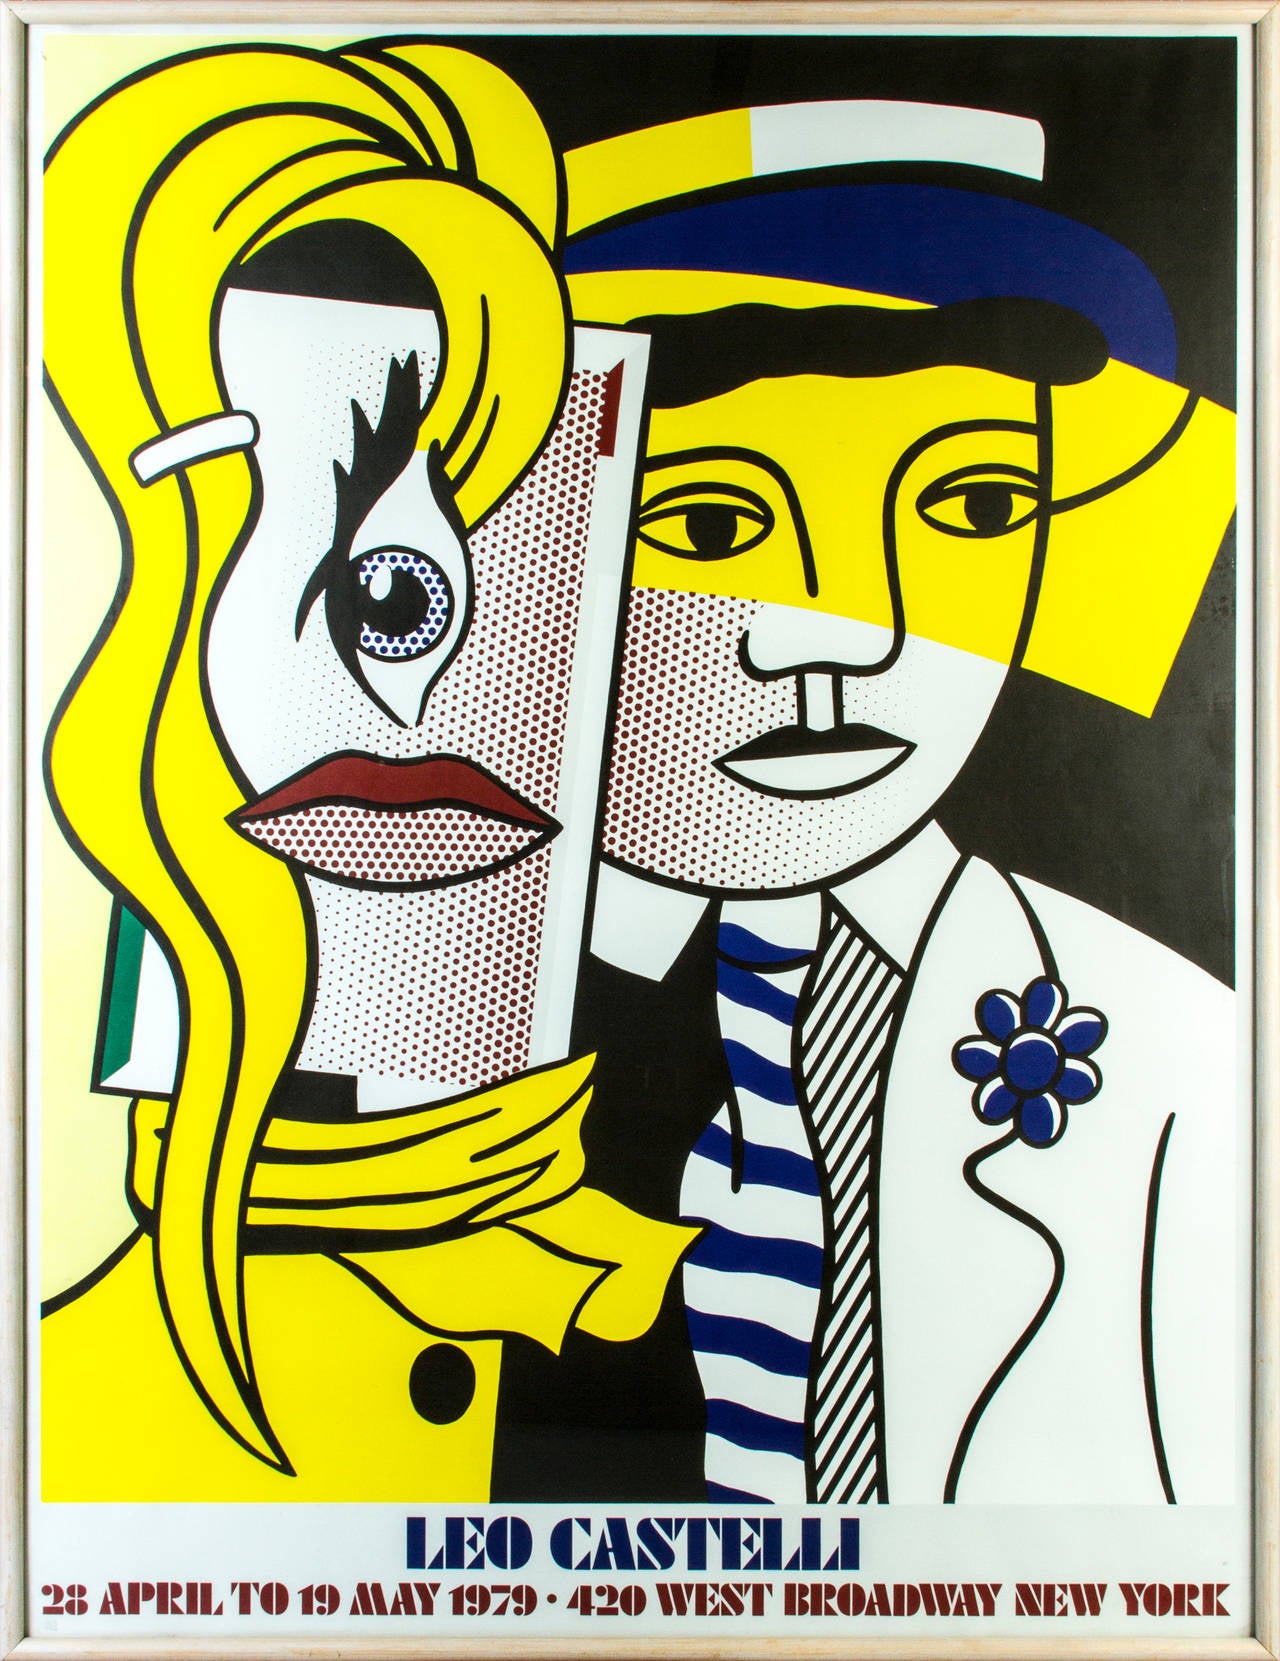 This poster was for Lichtenstein's exhibit in 1979 at Leo Castelli. The poster was taken from the painting that was done in 1978.